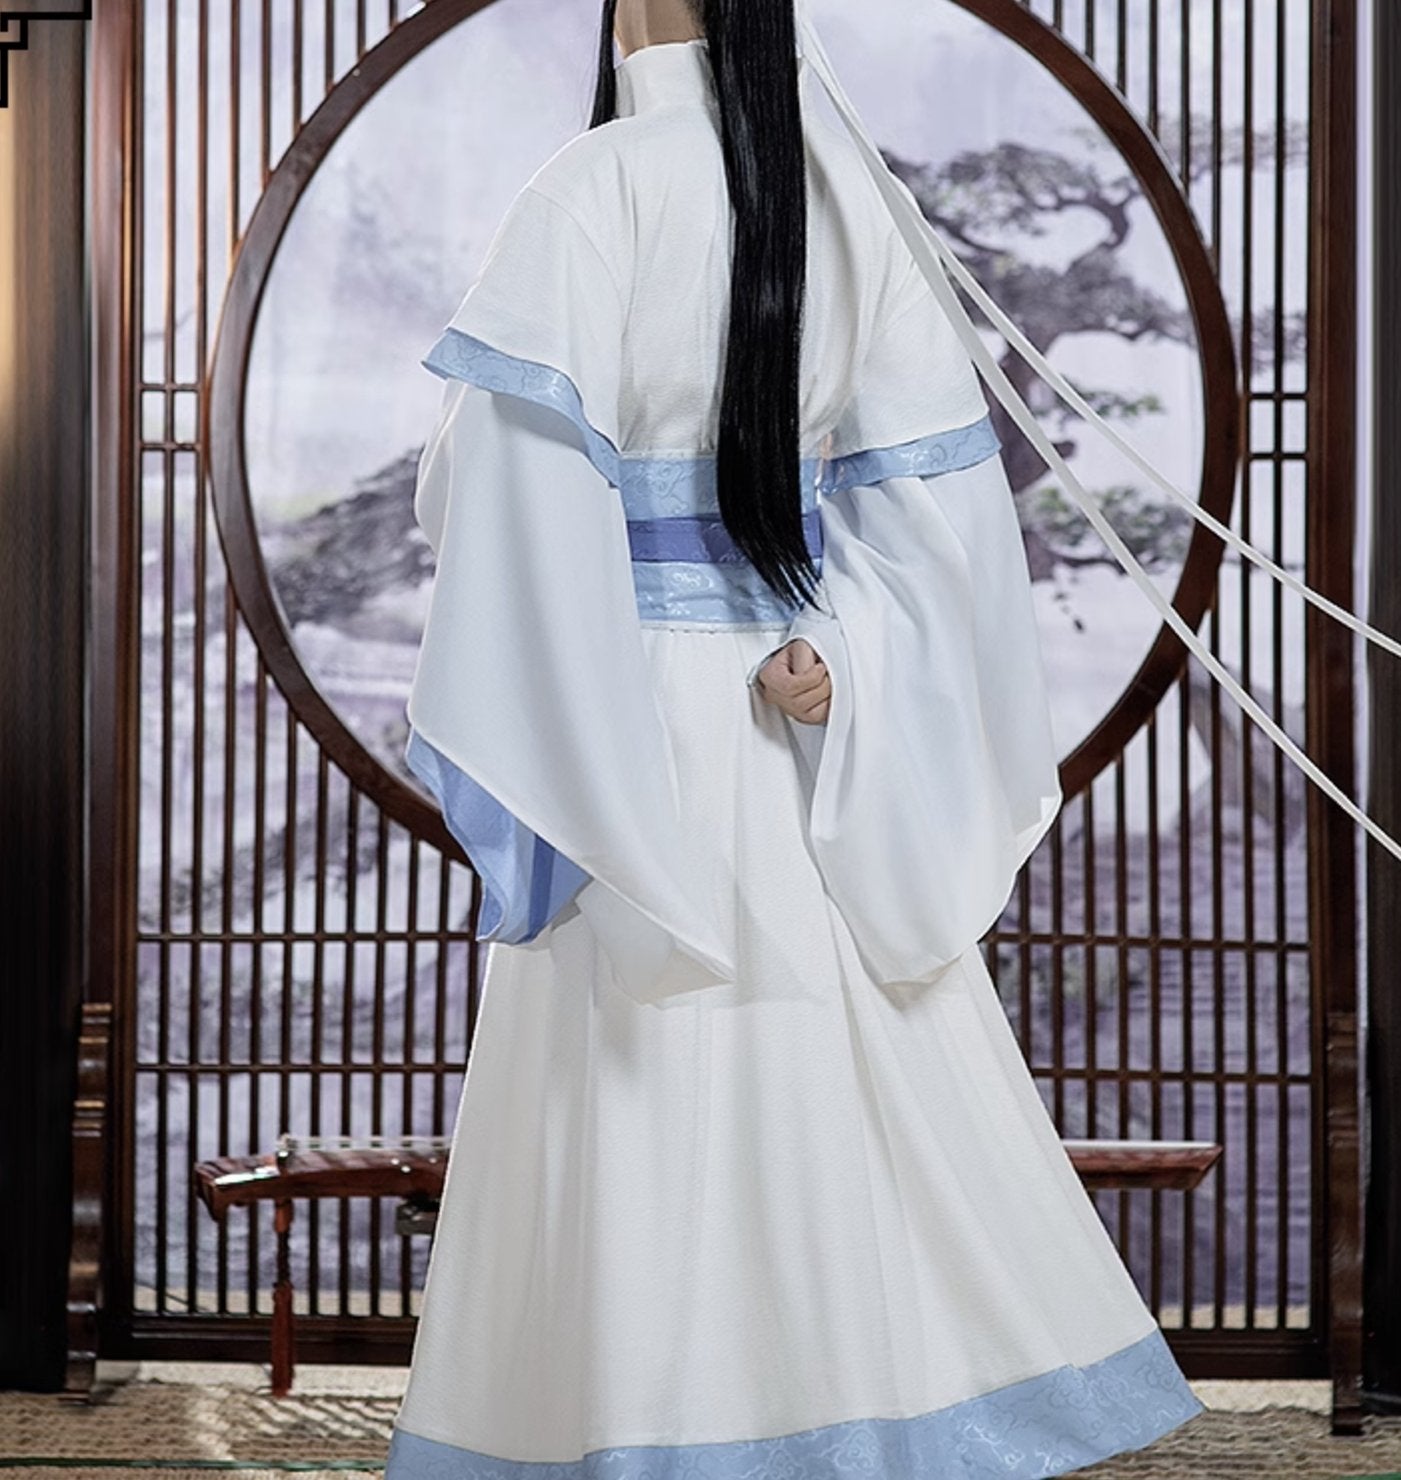 MDZS Lan Xichen Cosplay Costume Anime Suit Limited Version 15104:411589